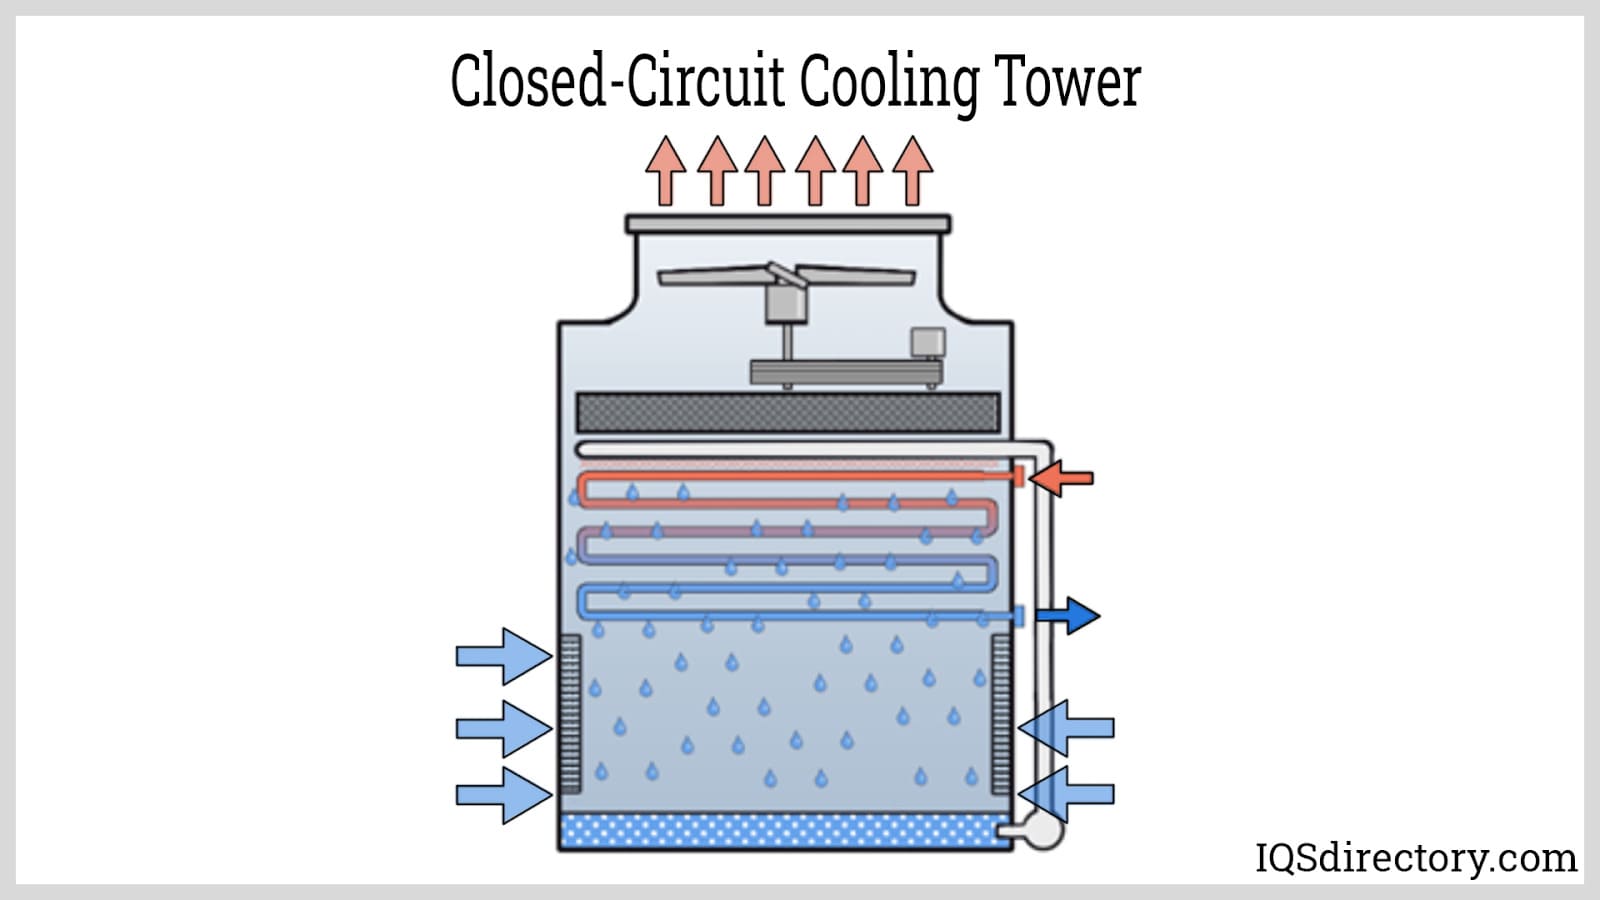 Closed-Circuit Cooling Tower